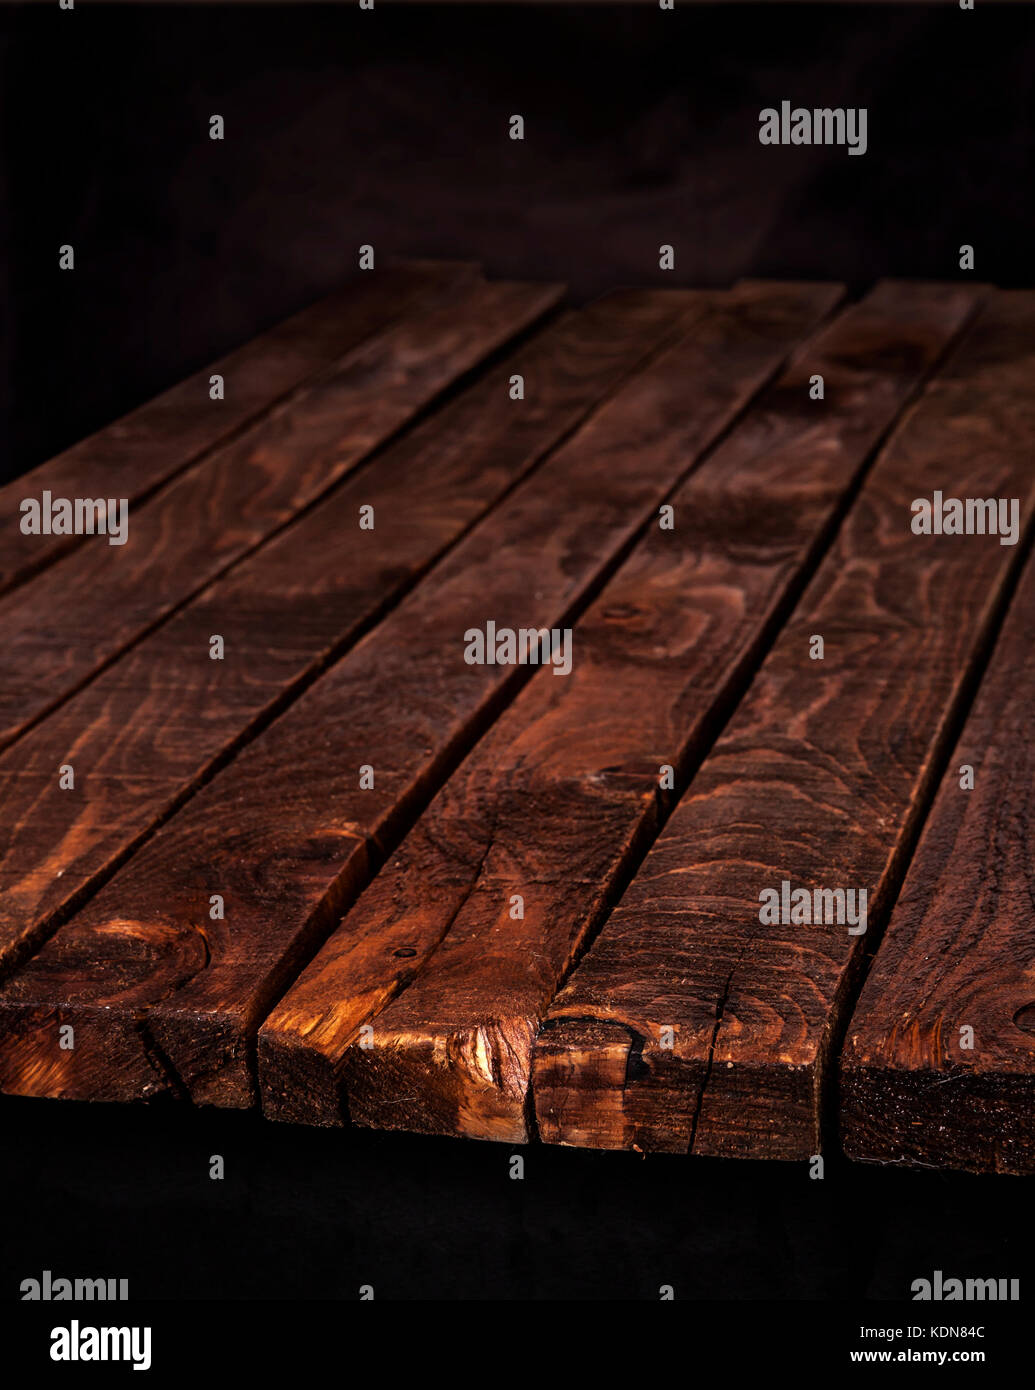 Dark wood table, brown wooden background Stock Photo